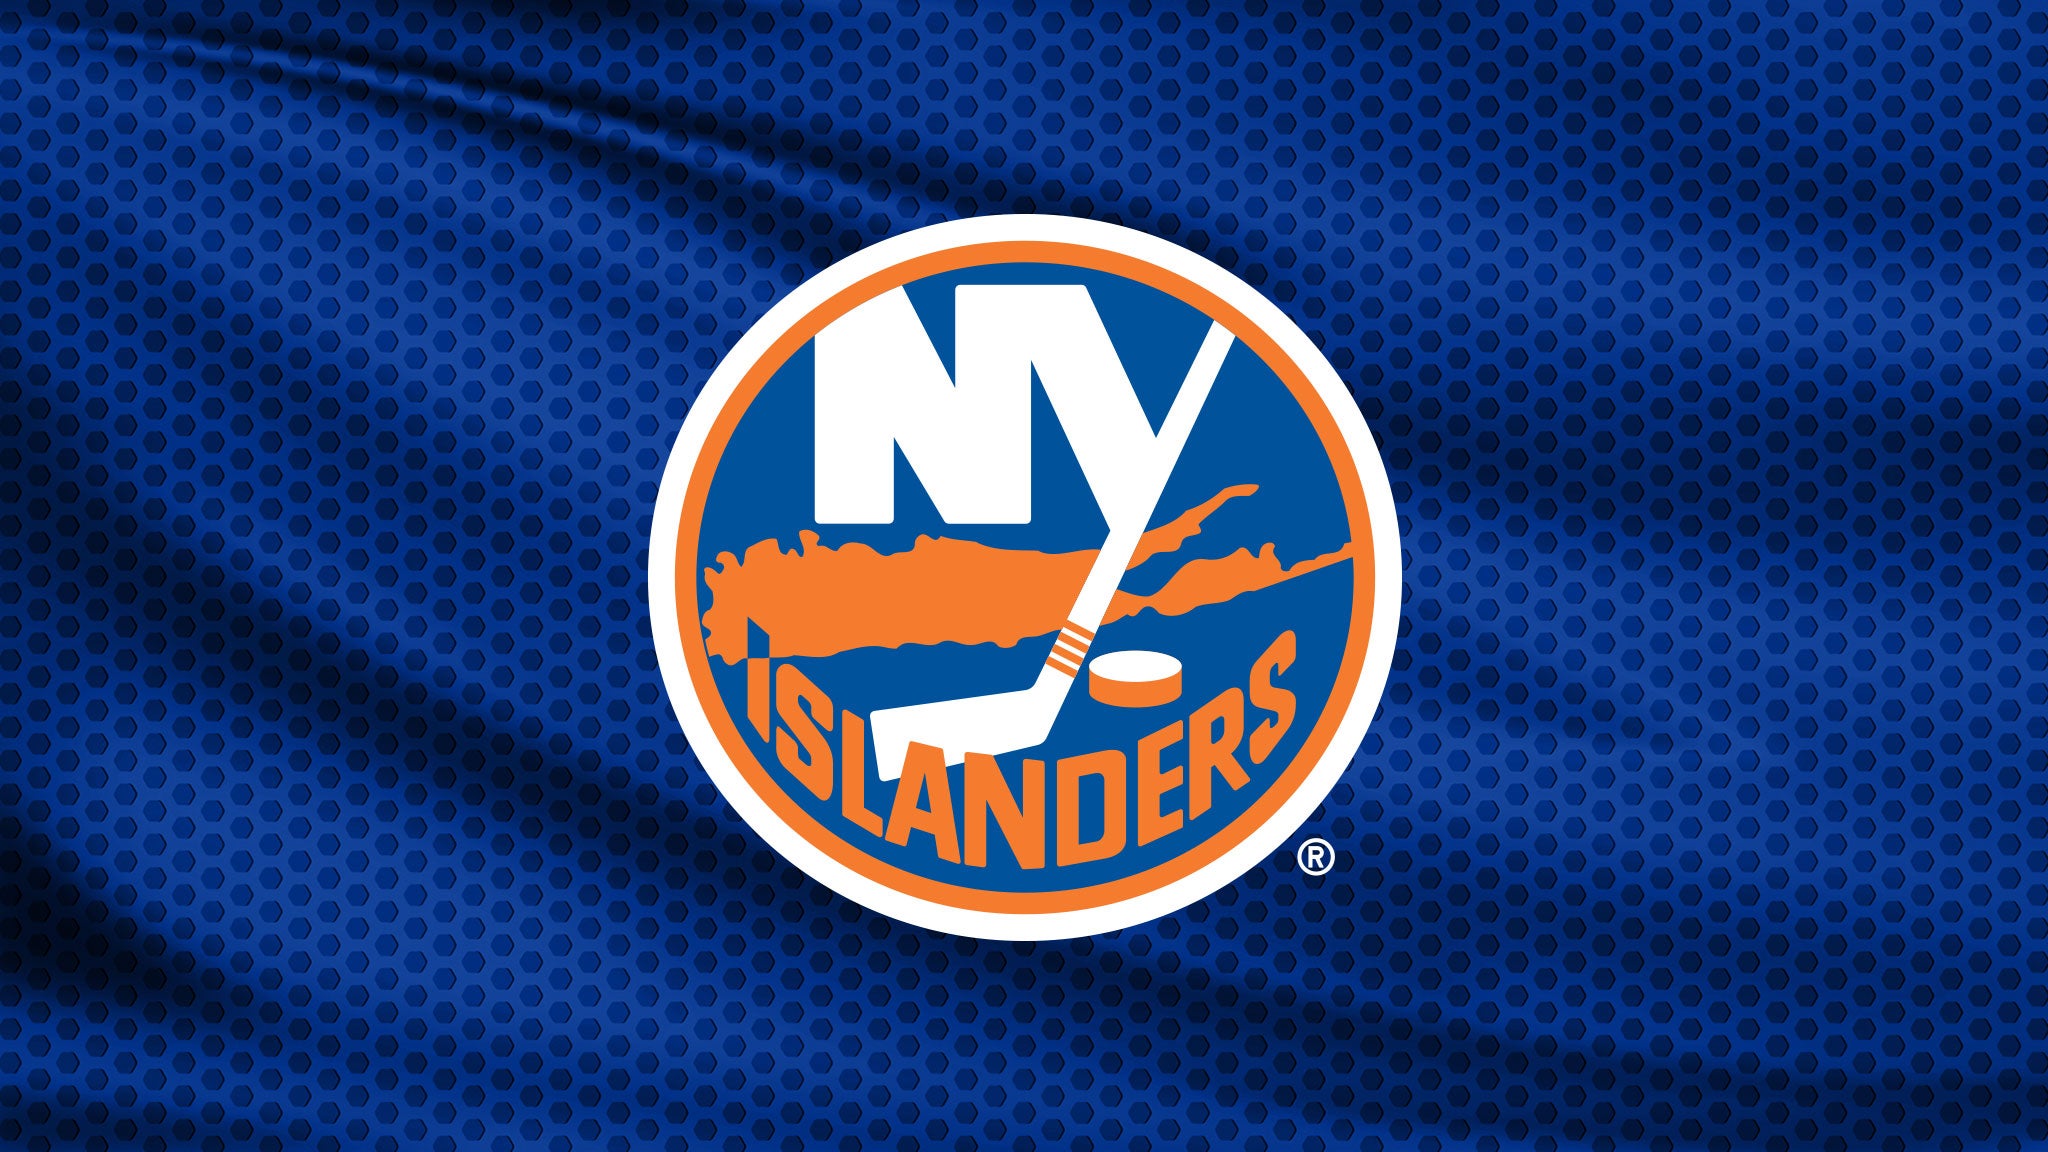 First Round: Hurricanes at Islanders Round 1 Home Game 2 in Belmont Park - Long Island promo photo for Bridgeport presale offer code